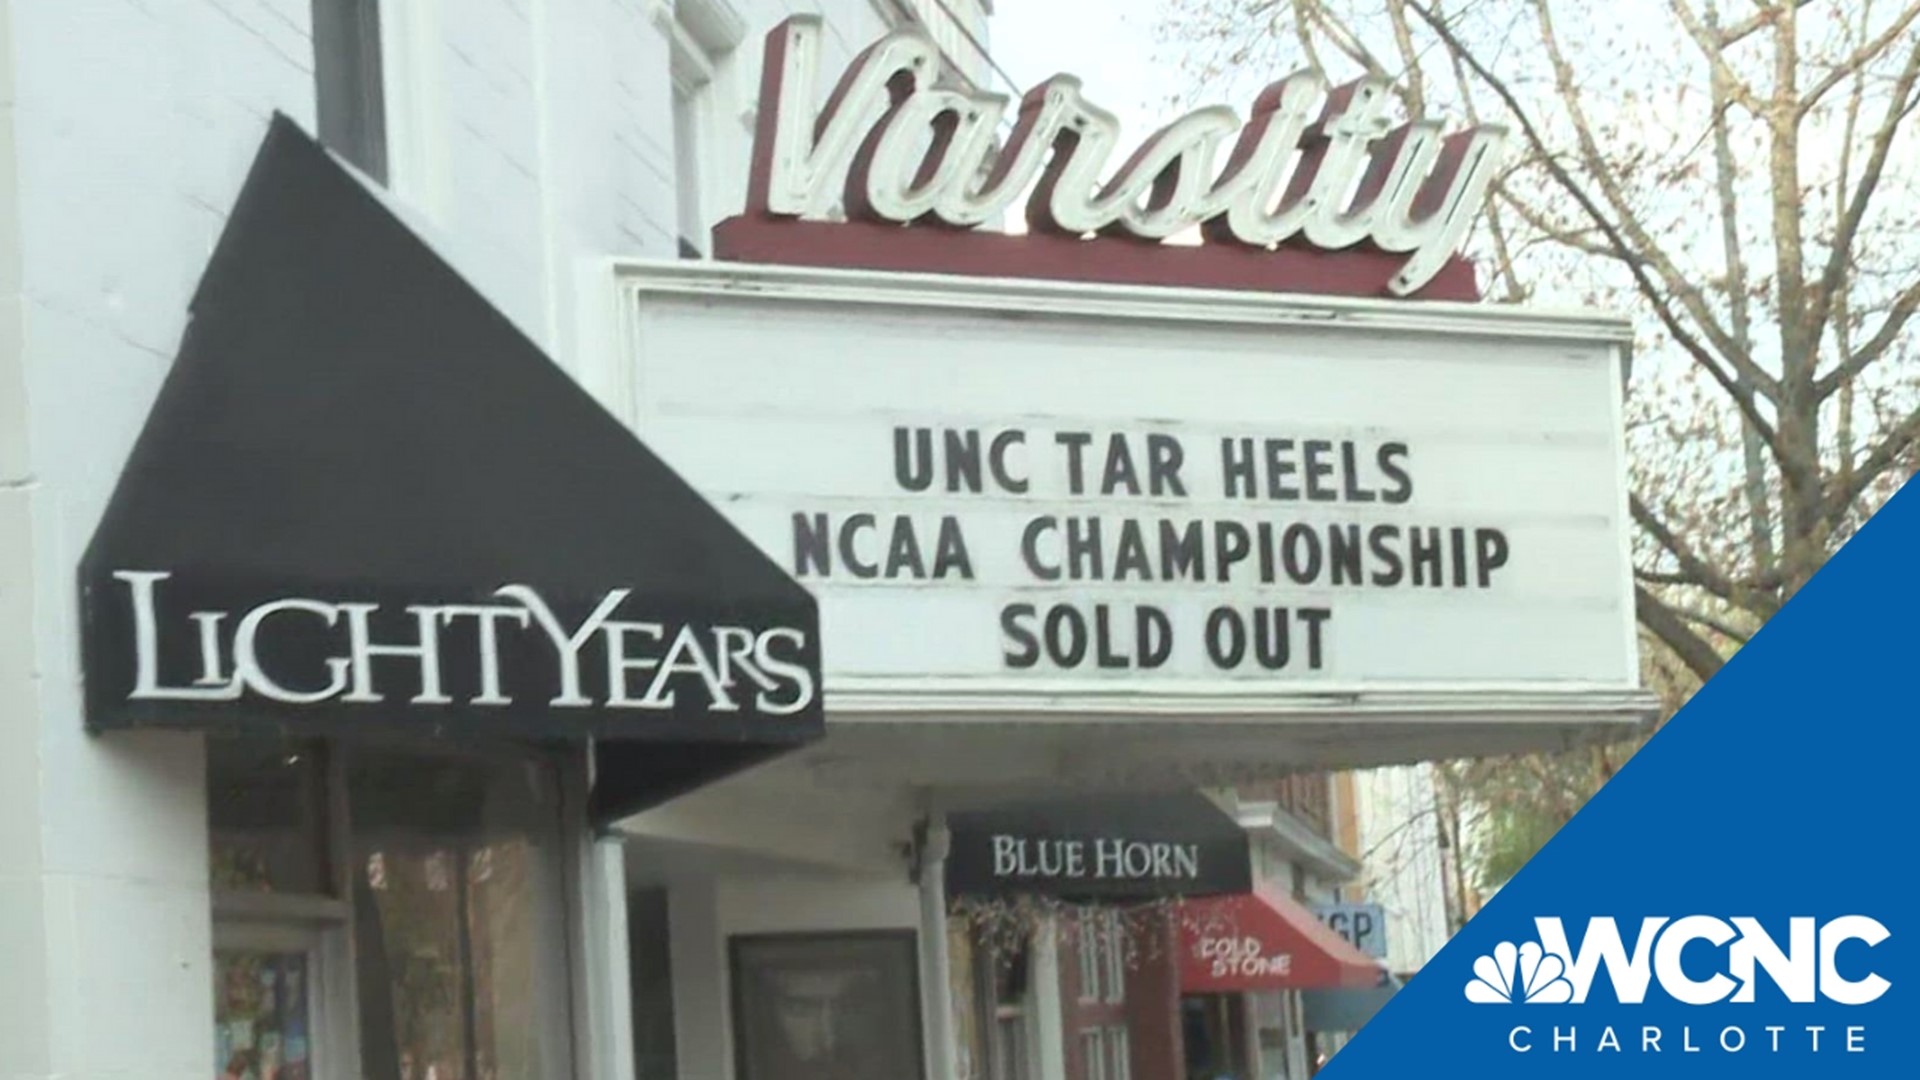 North Carolina is looking to get its seventh national title in New Orleans.